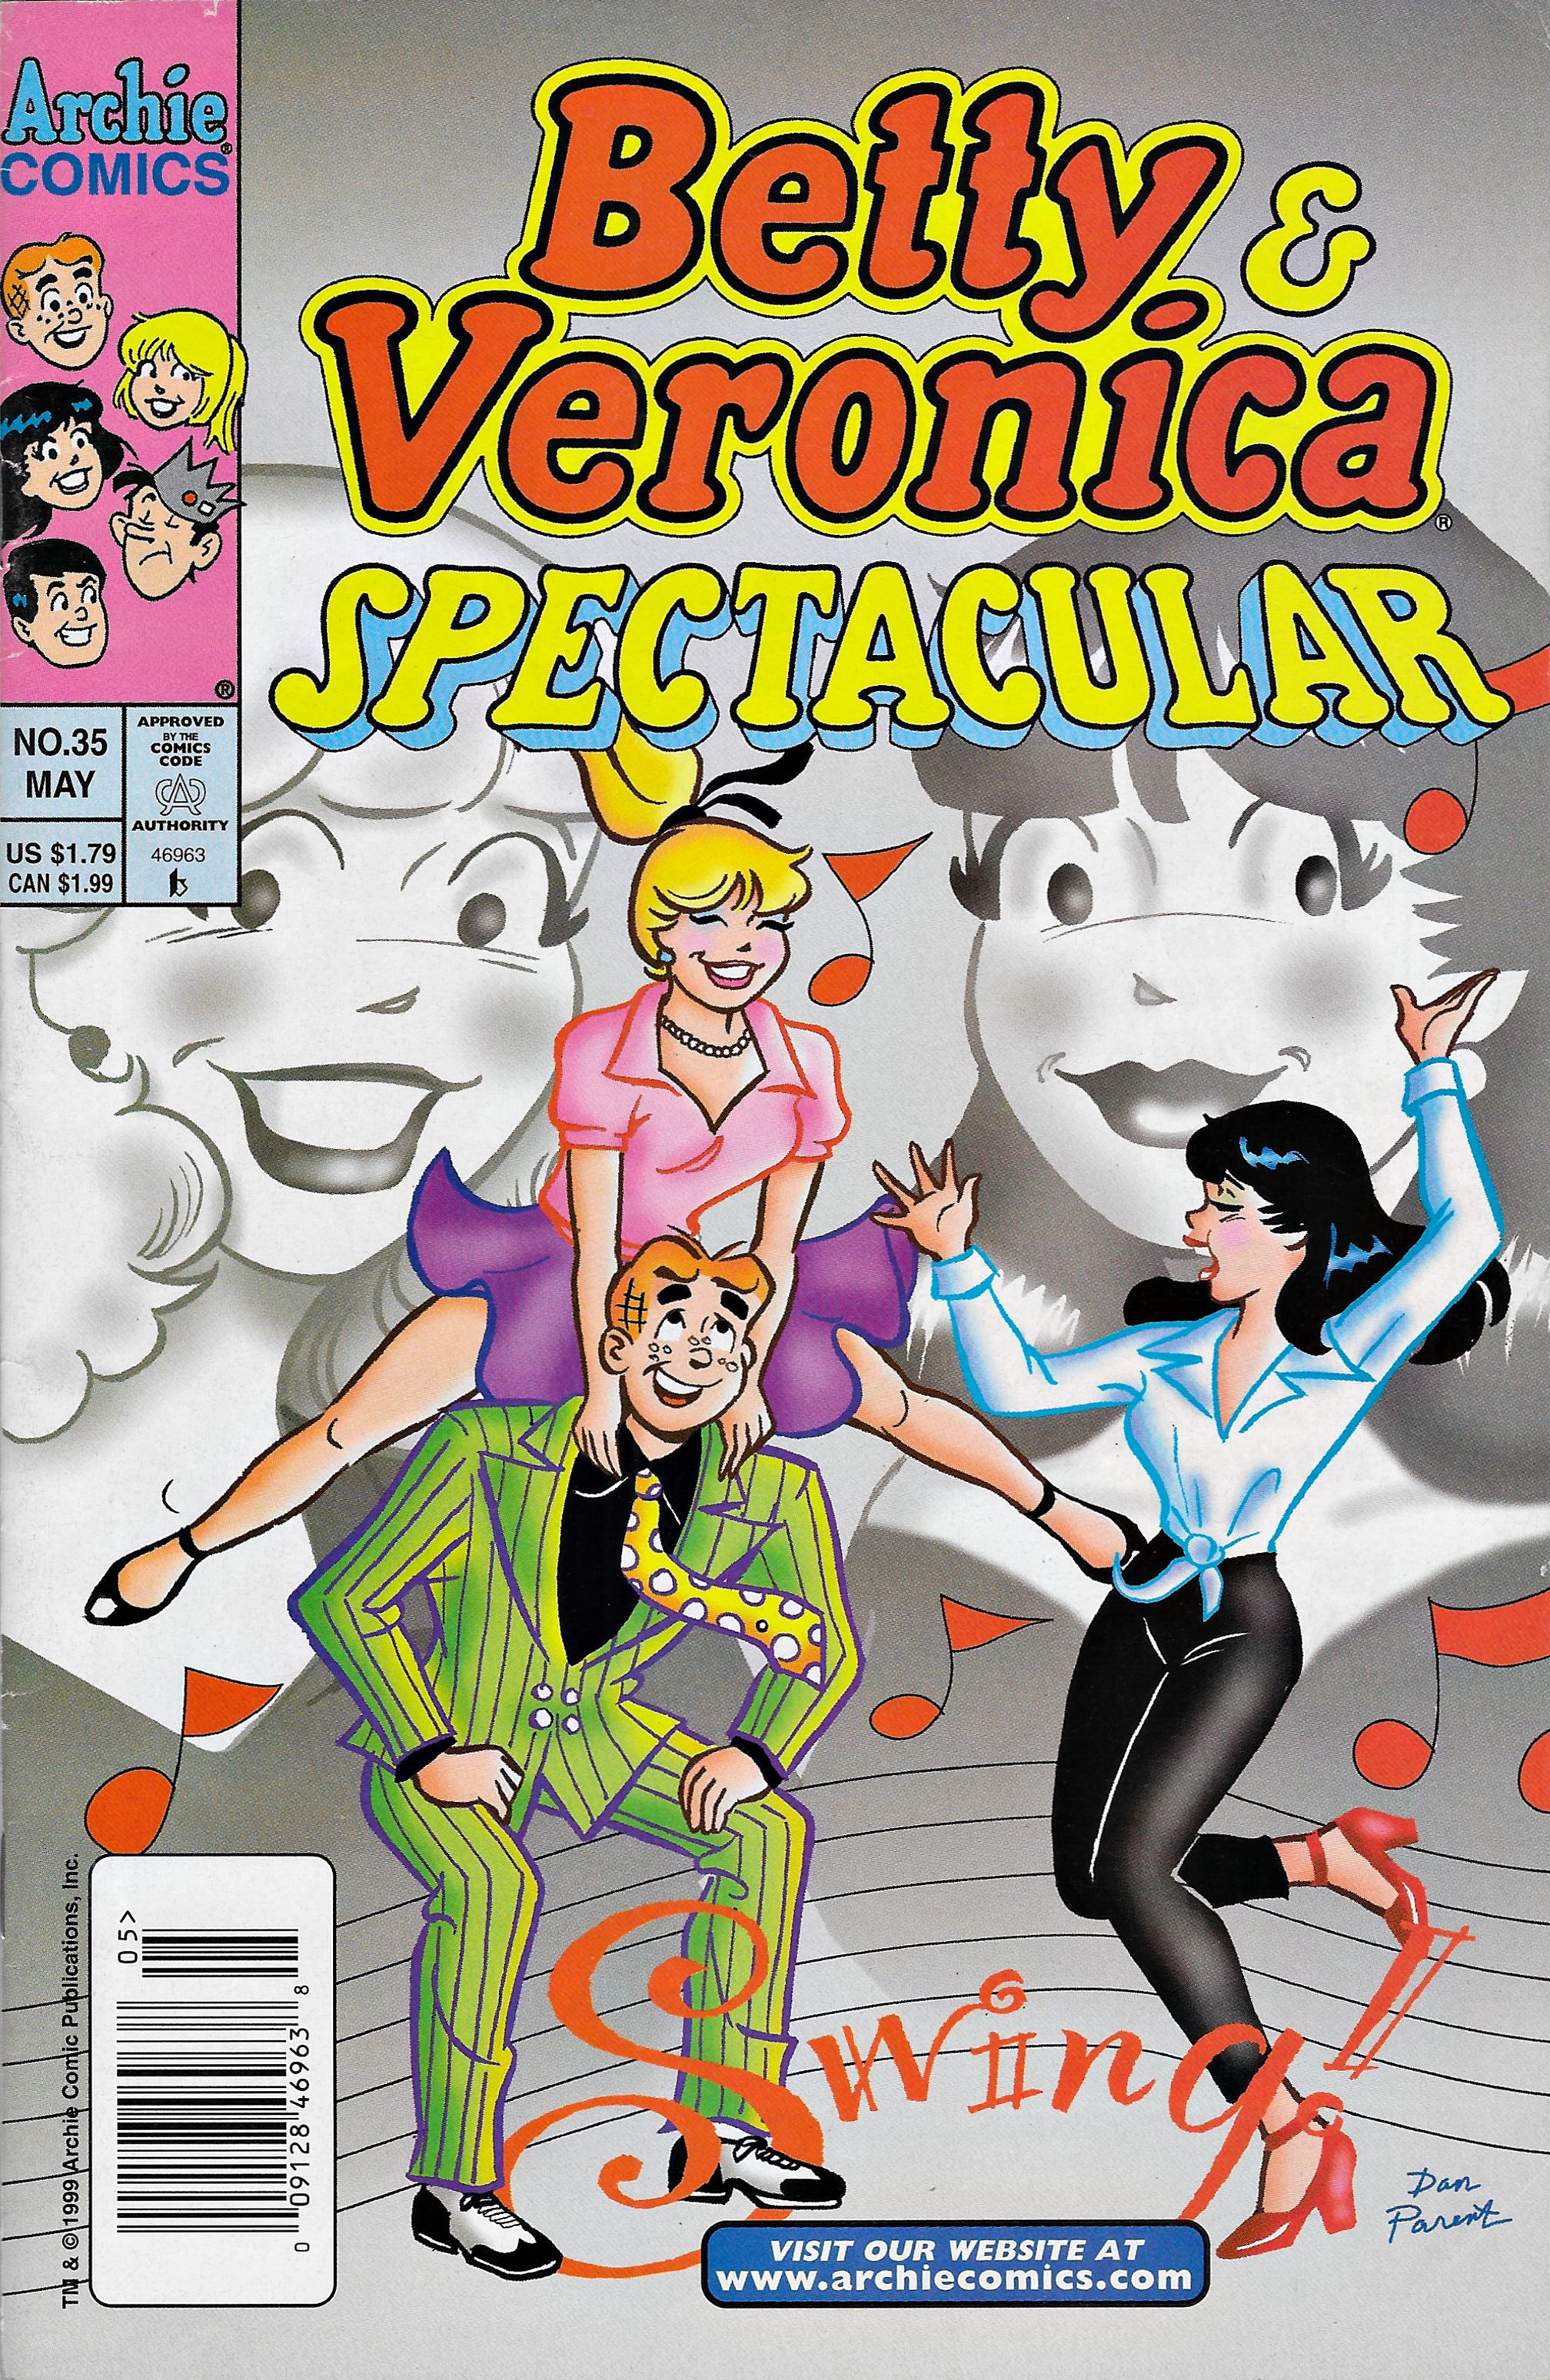 Read online Betty & Veronica Spectacular comic -  Issue #35 - 1